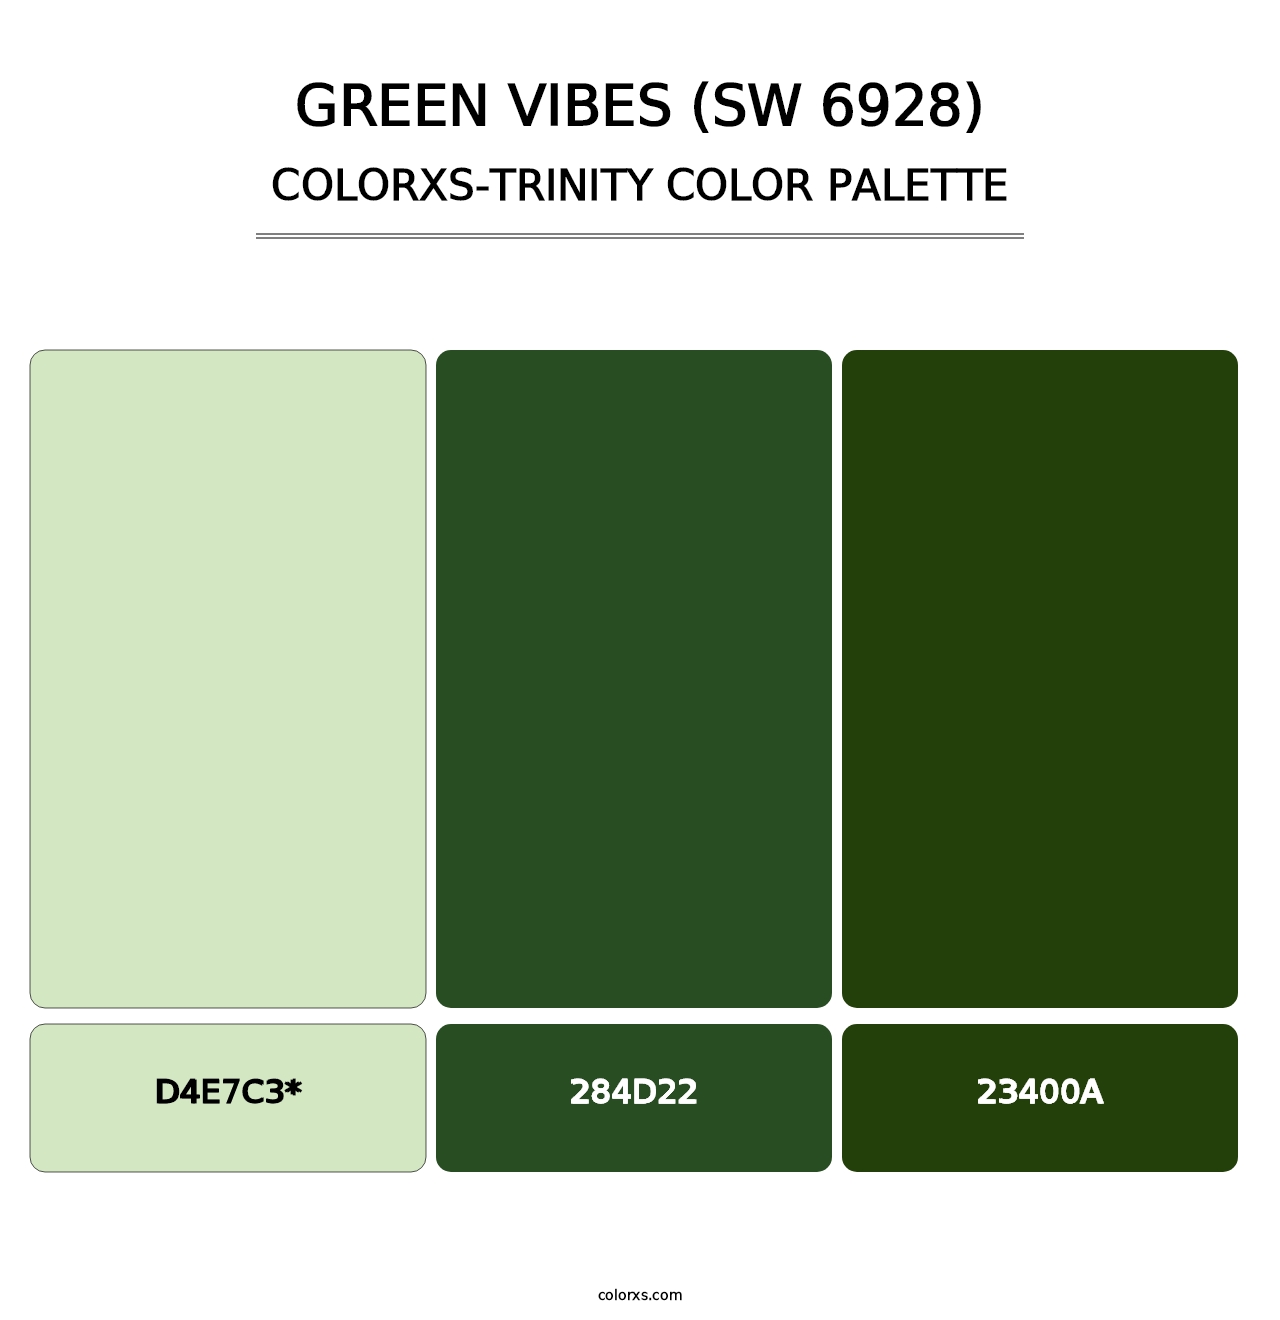 Green Vibes (SW 6928) - Colorxs Trinity Palette